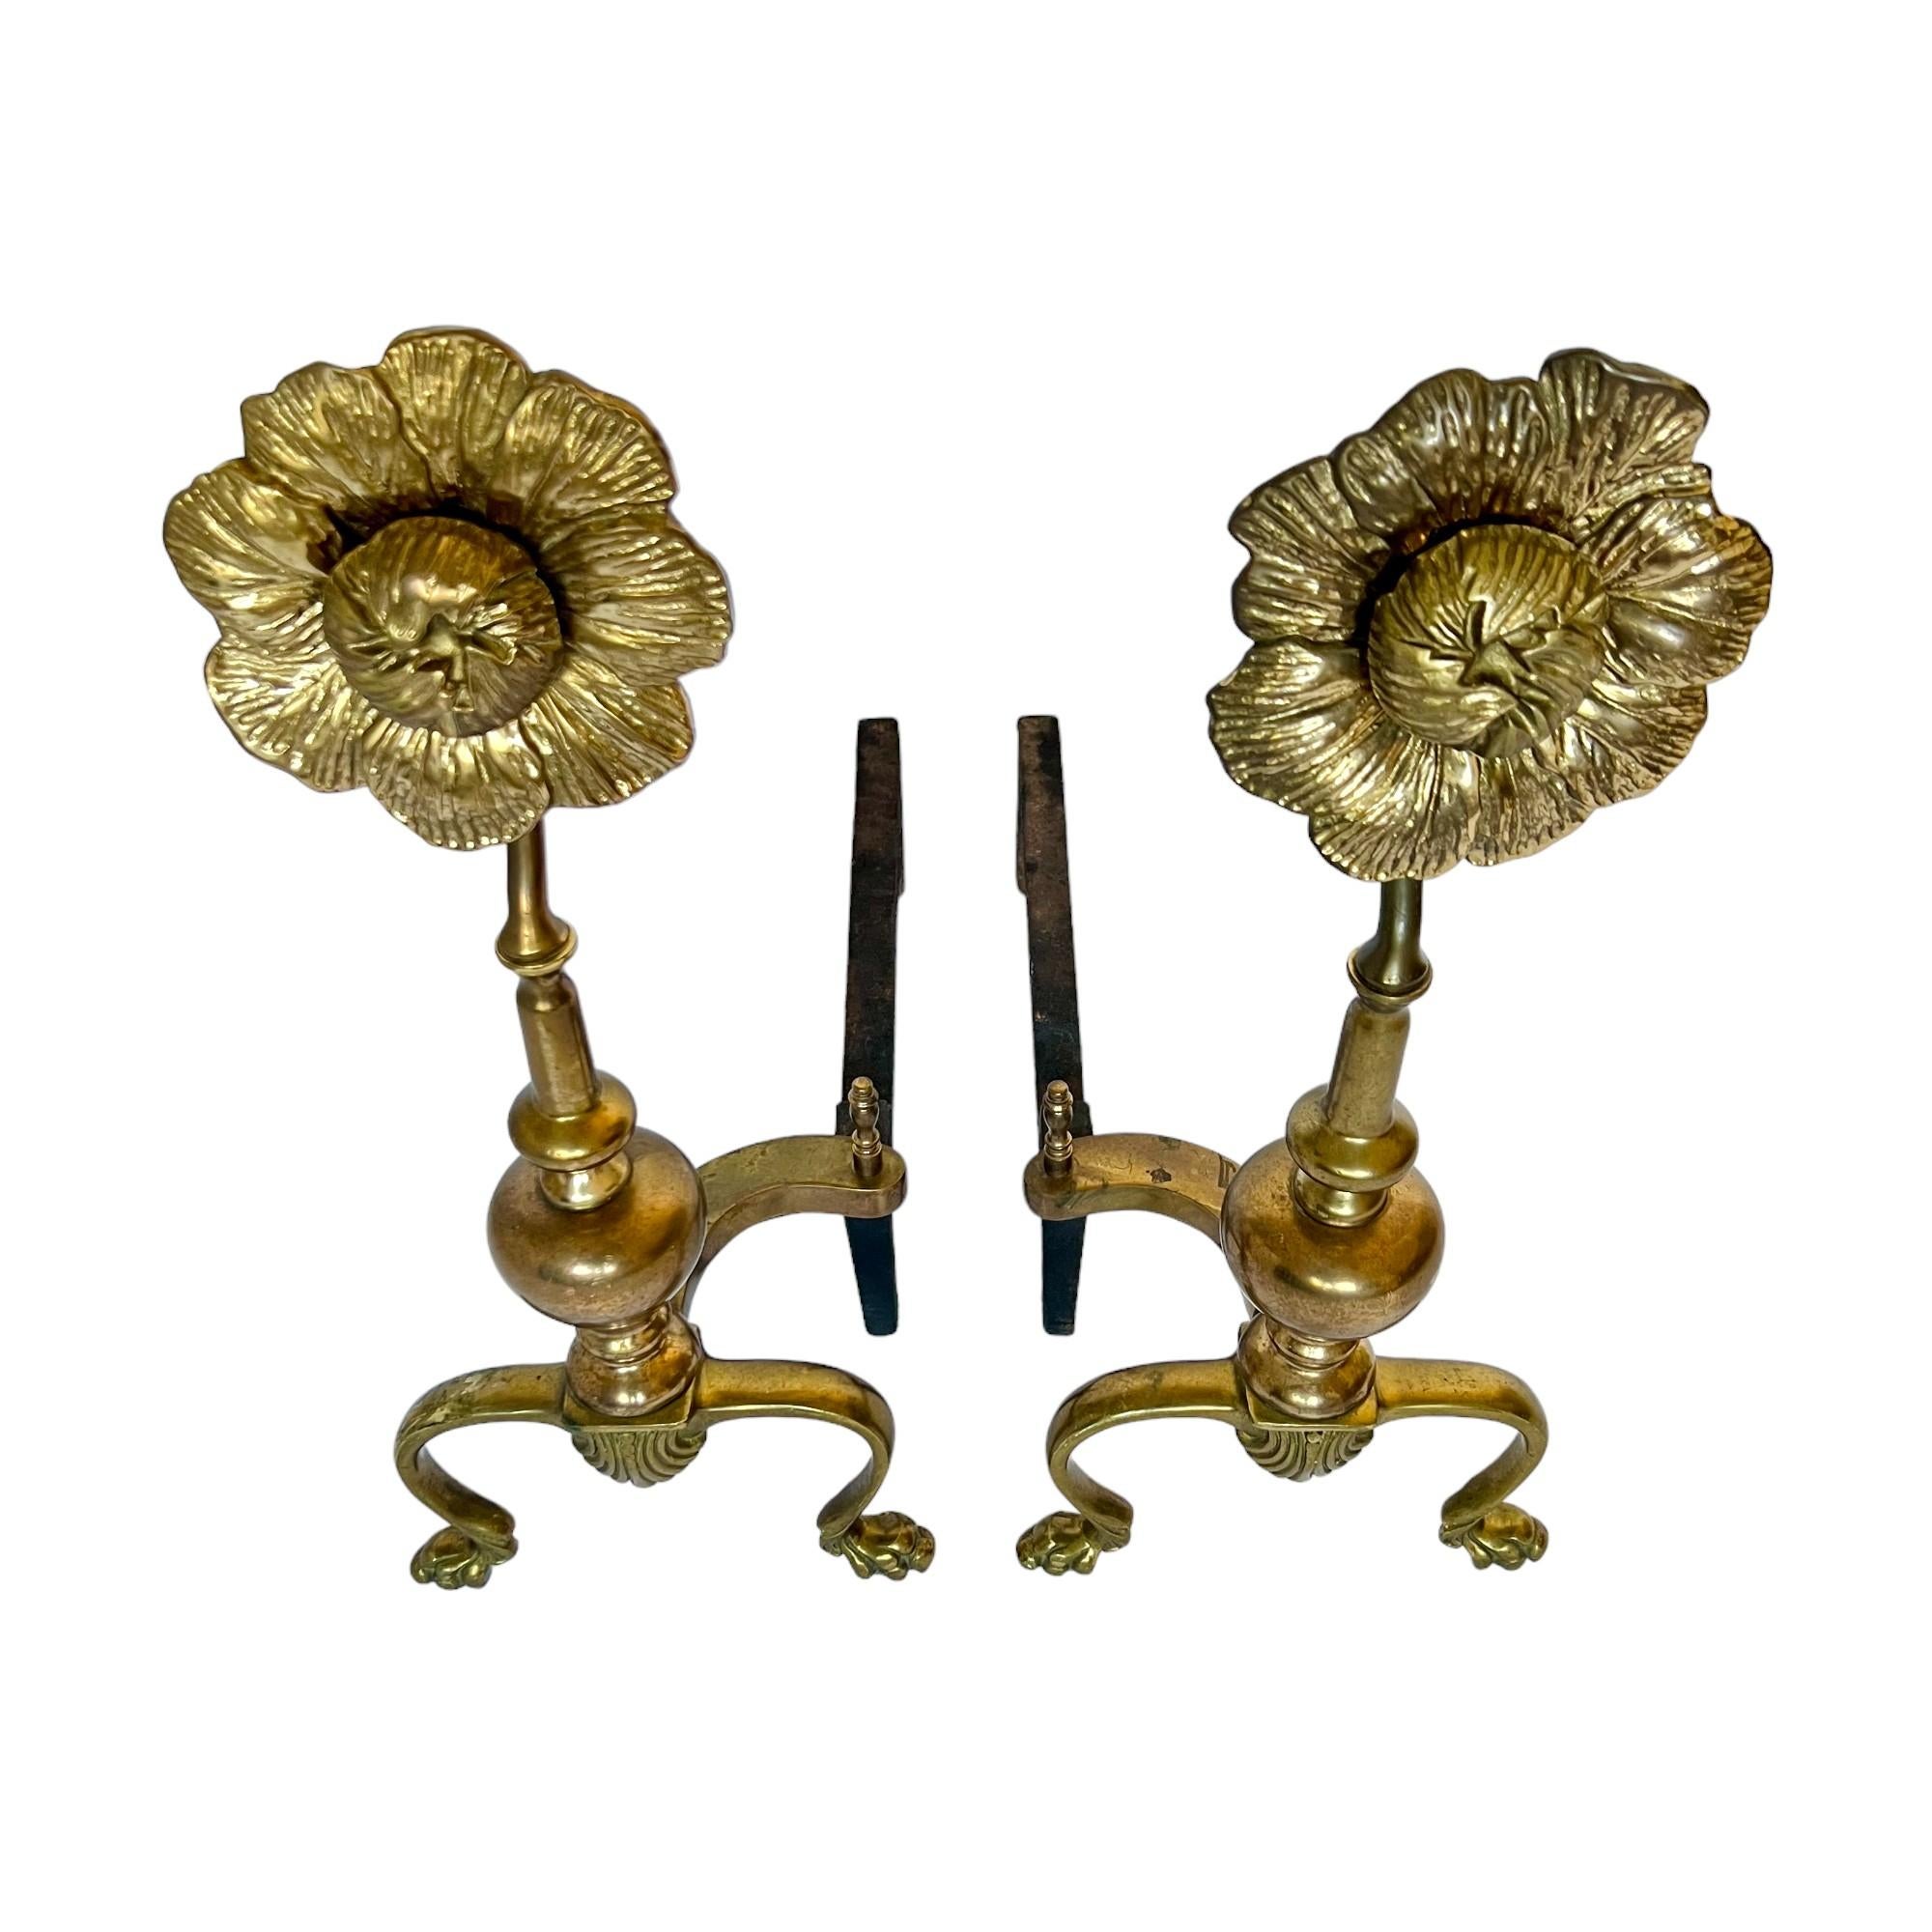 Hollywood Regency Mid 20th Century Brass Flower Andirons or Chenets, a Pair